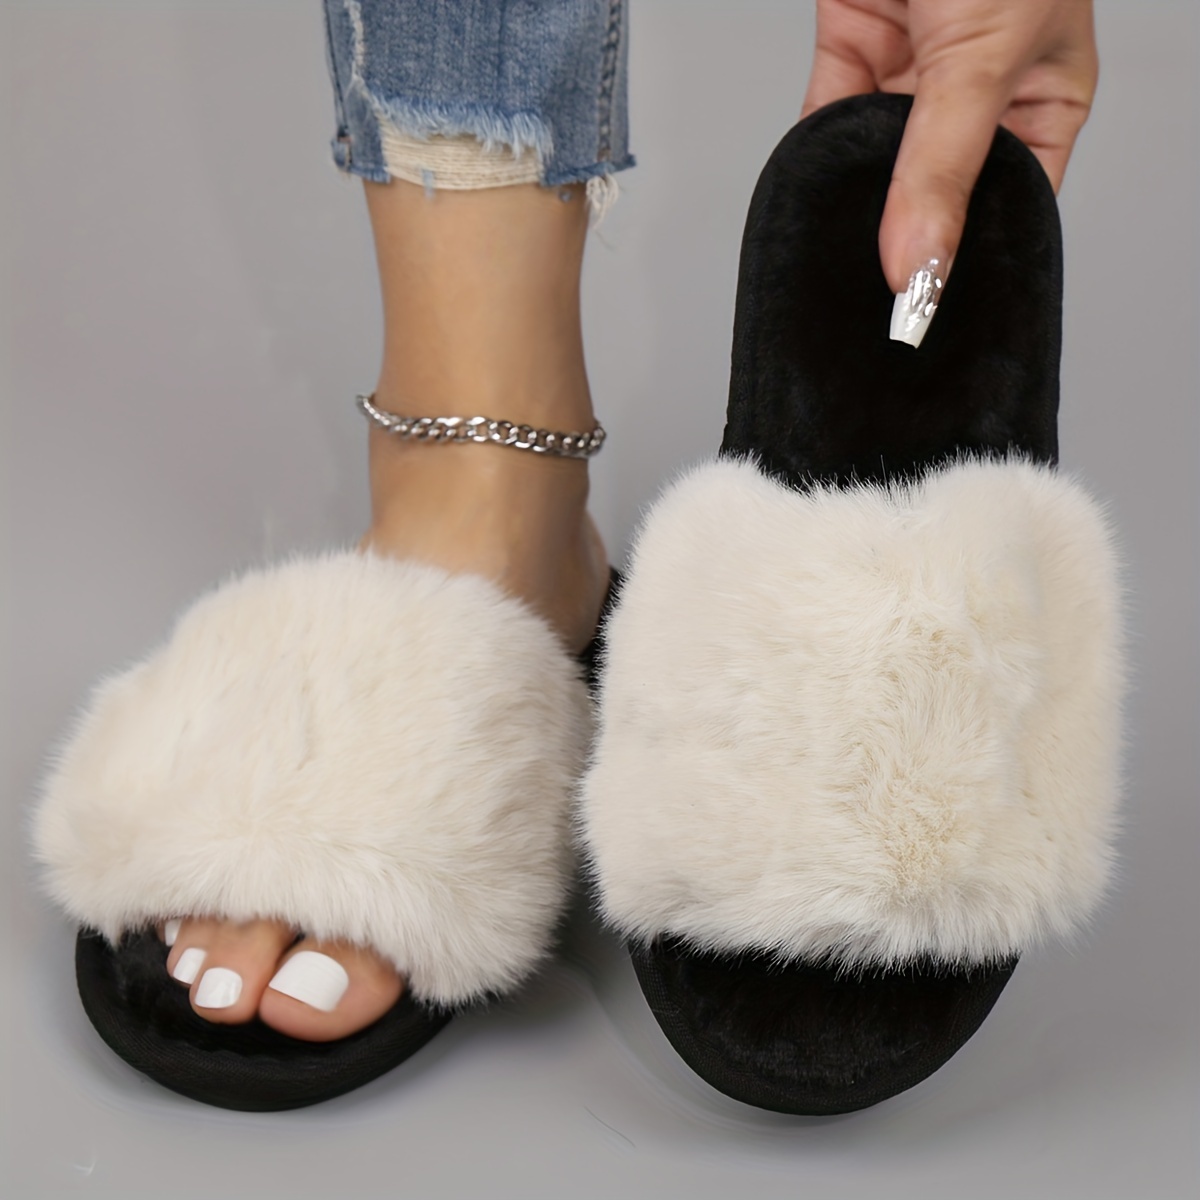 Open Toe Fuzzy Slippers for Women, Grey Plain House Shoes Home Sandals  Slides Comfy Anti-Slip